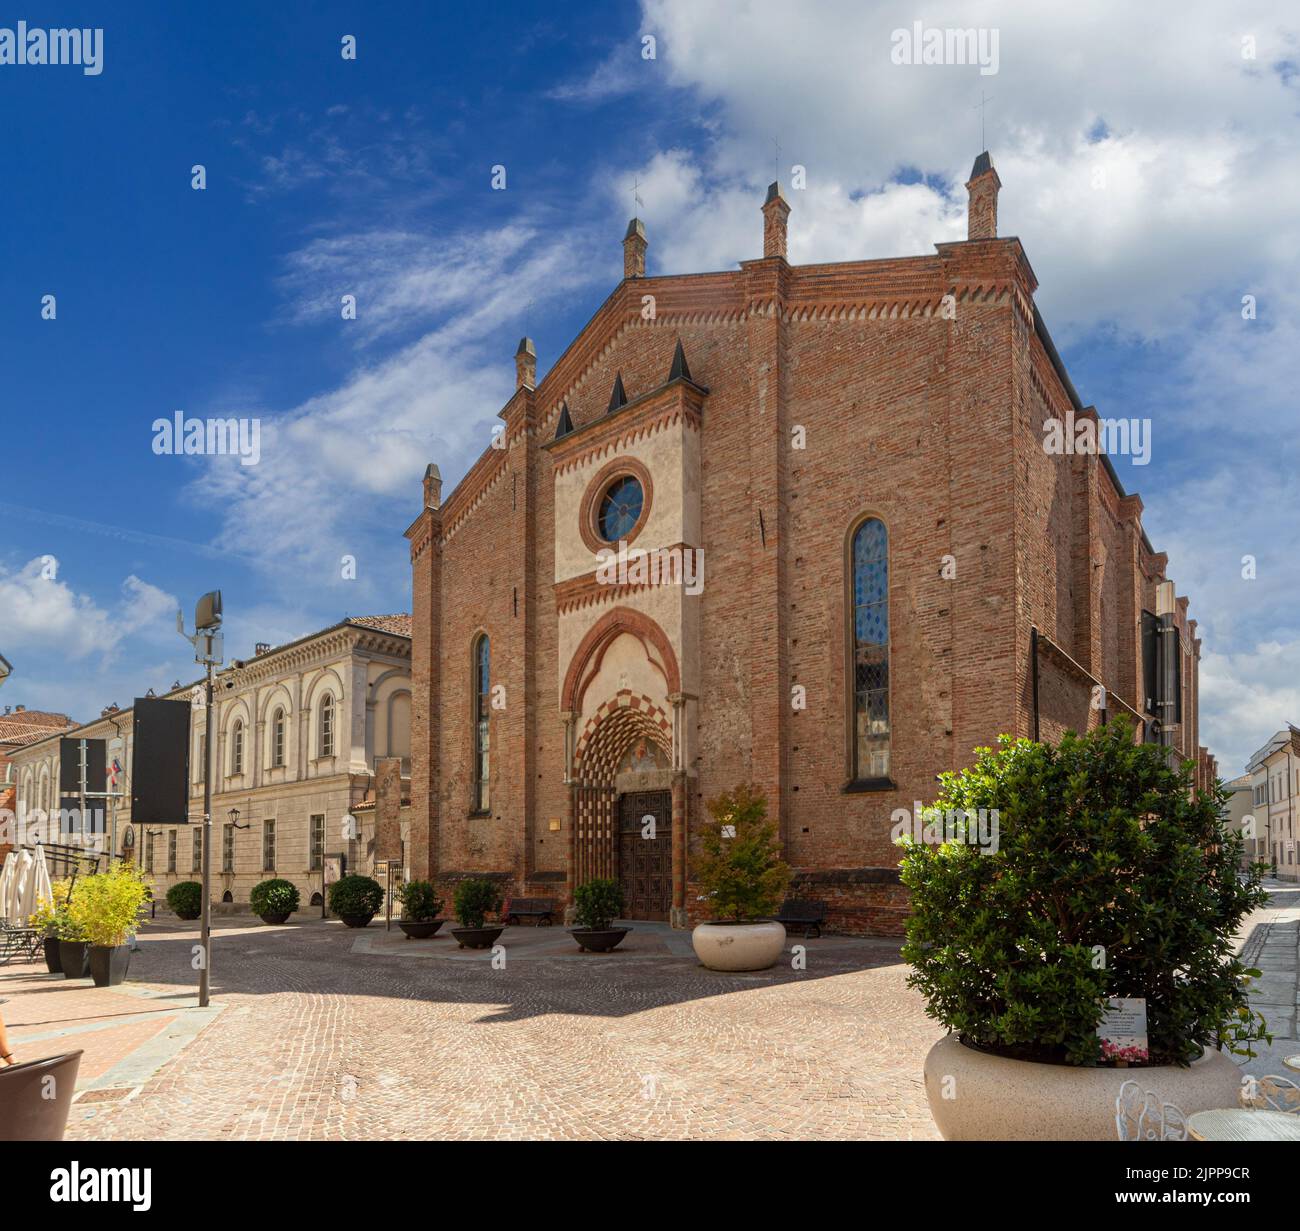 Alba, Langhe, Piedmont, Italy - August 16, 2022: view of Church of San Domenico in gothic style in the historic center Stock Photo